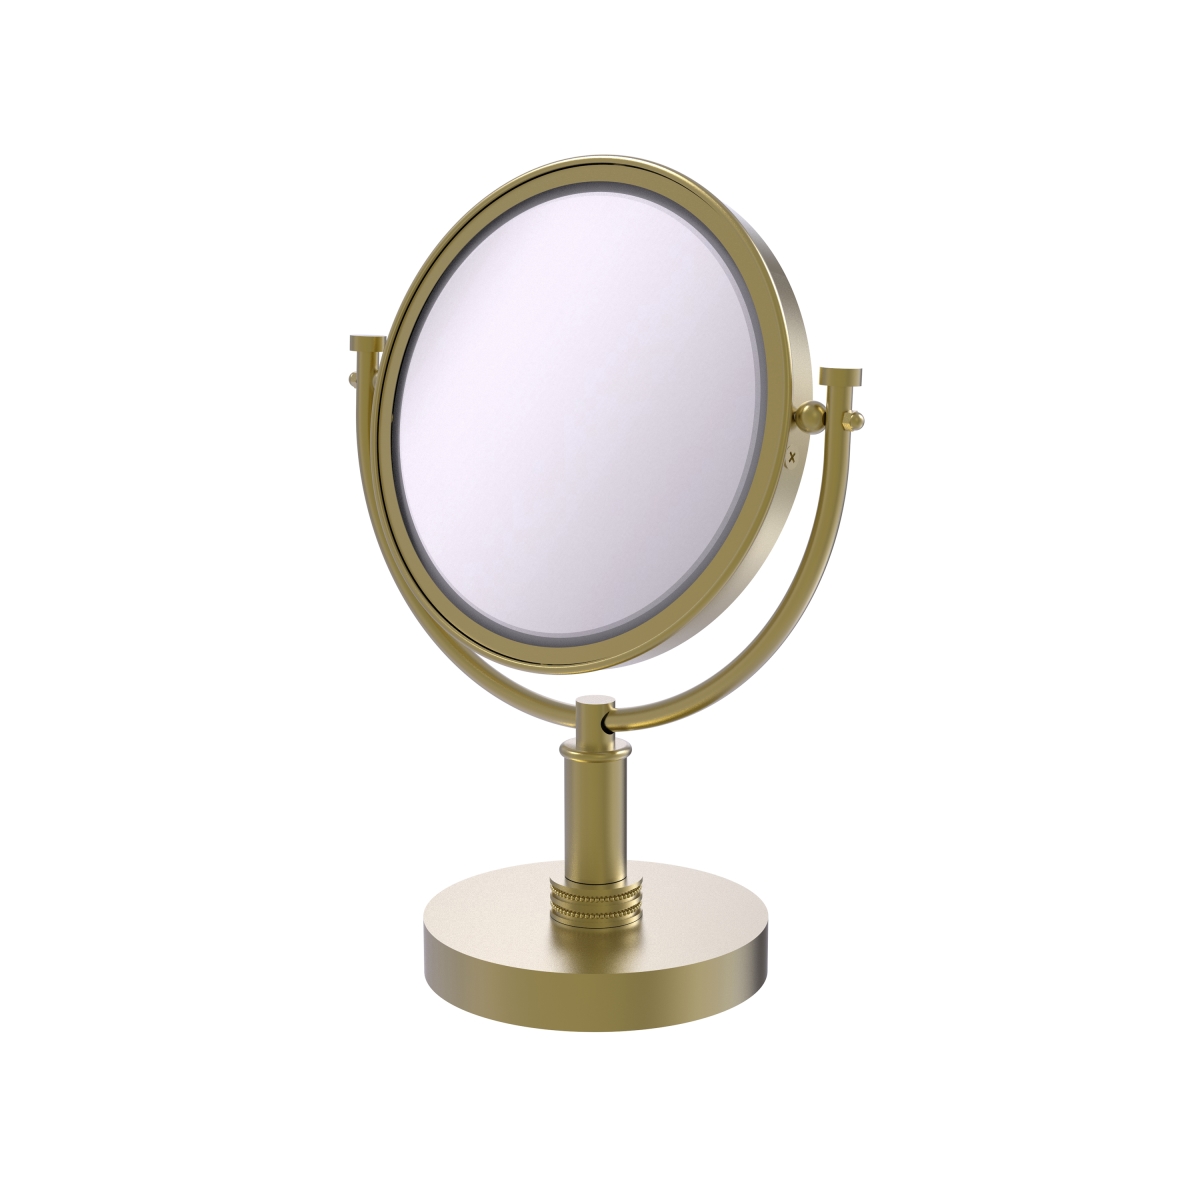 Dm-4d-2x-sbr Dotted Ring Style 8 In. Vanity Top Make-up Mirror 2x Magnification, Satin Brass